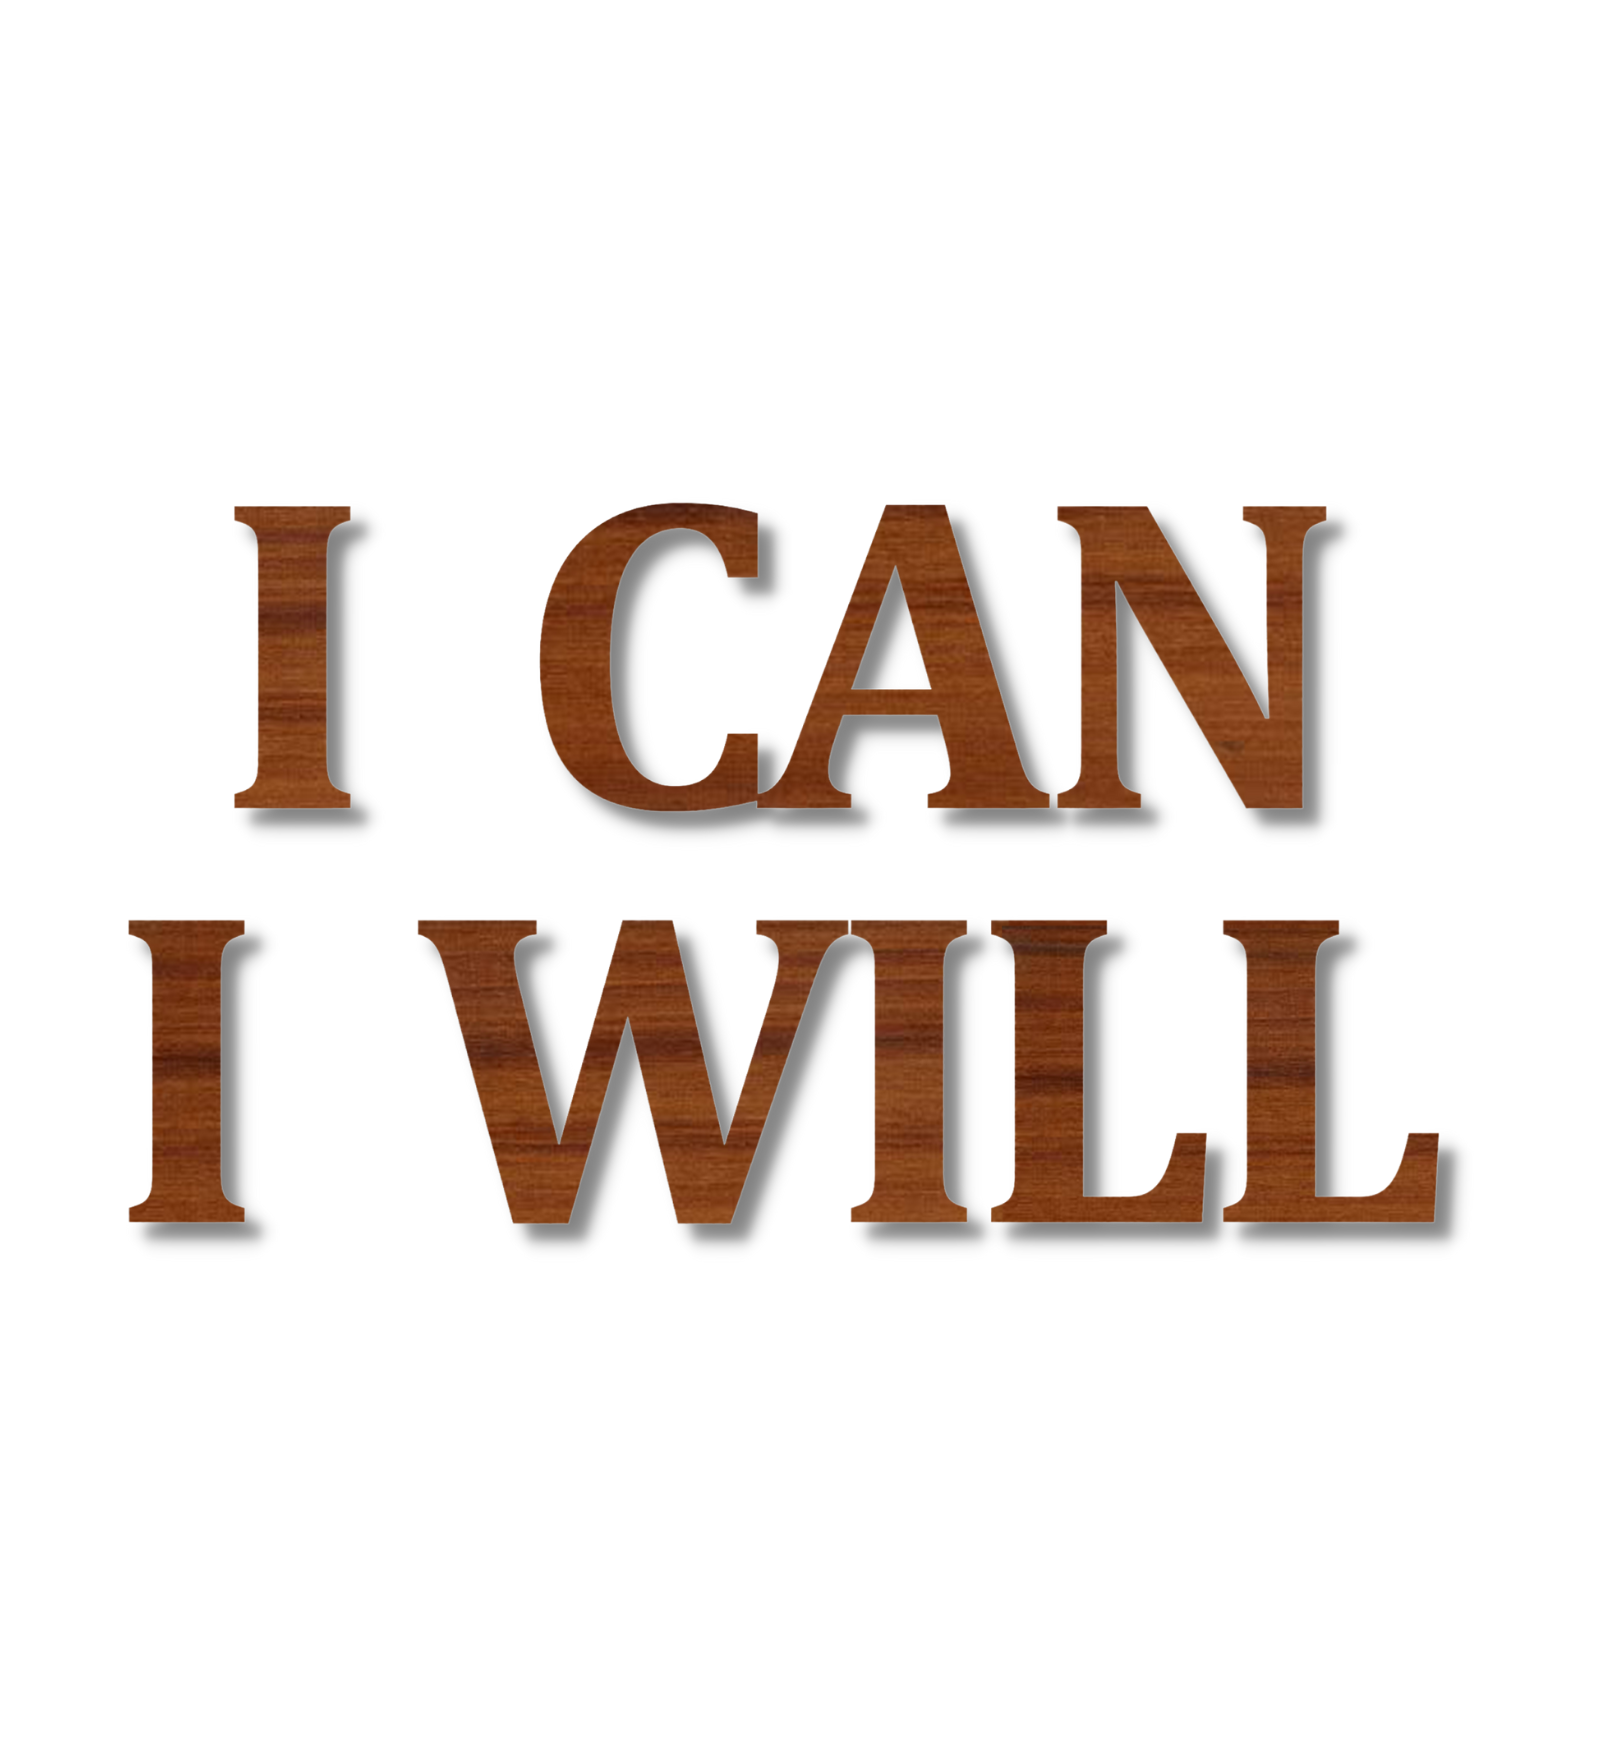 I CAN I WILL Motivational Quote 3D Wooden Art Wemy Store